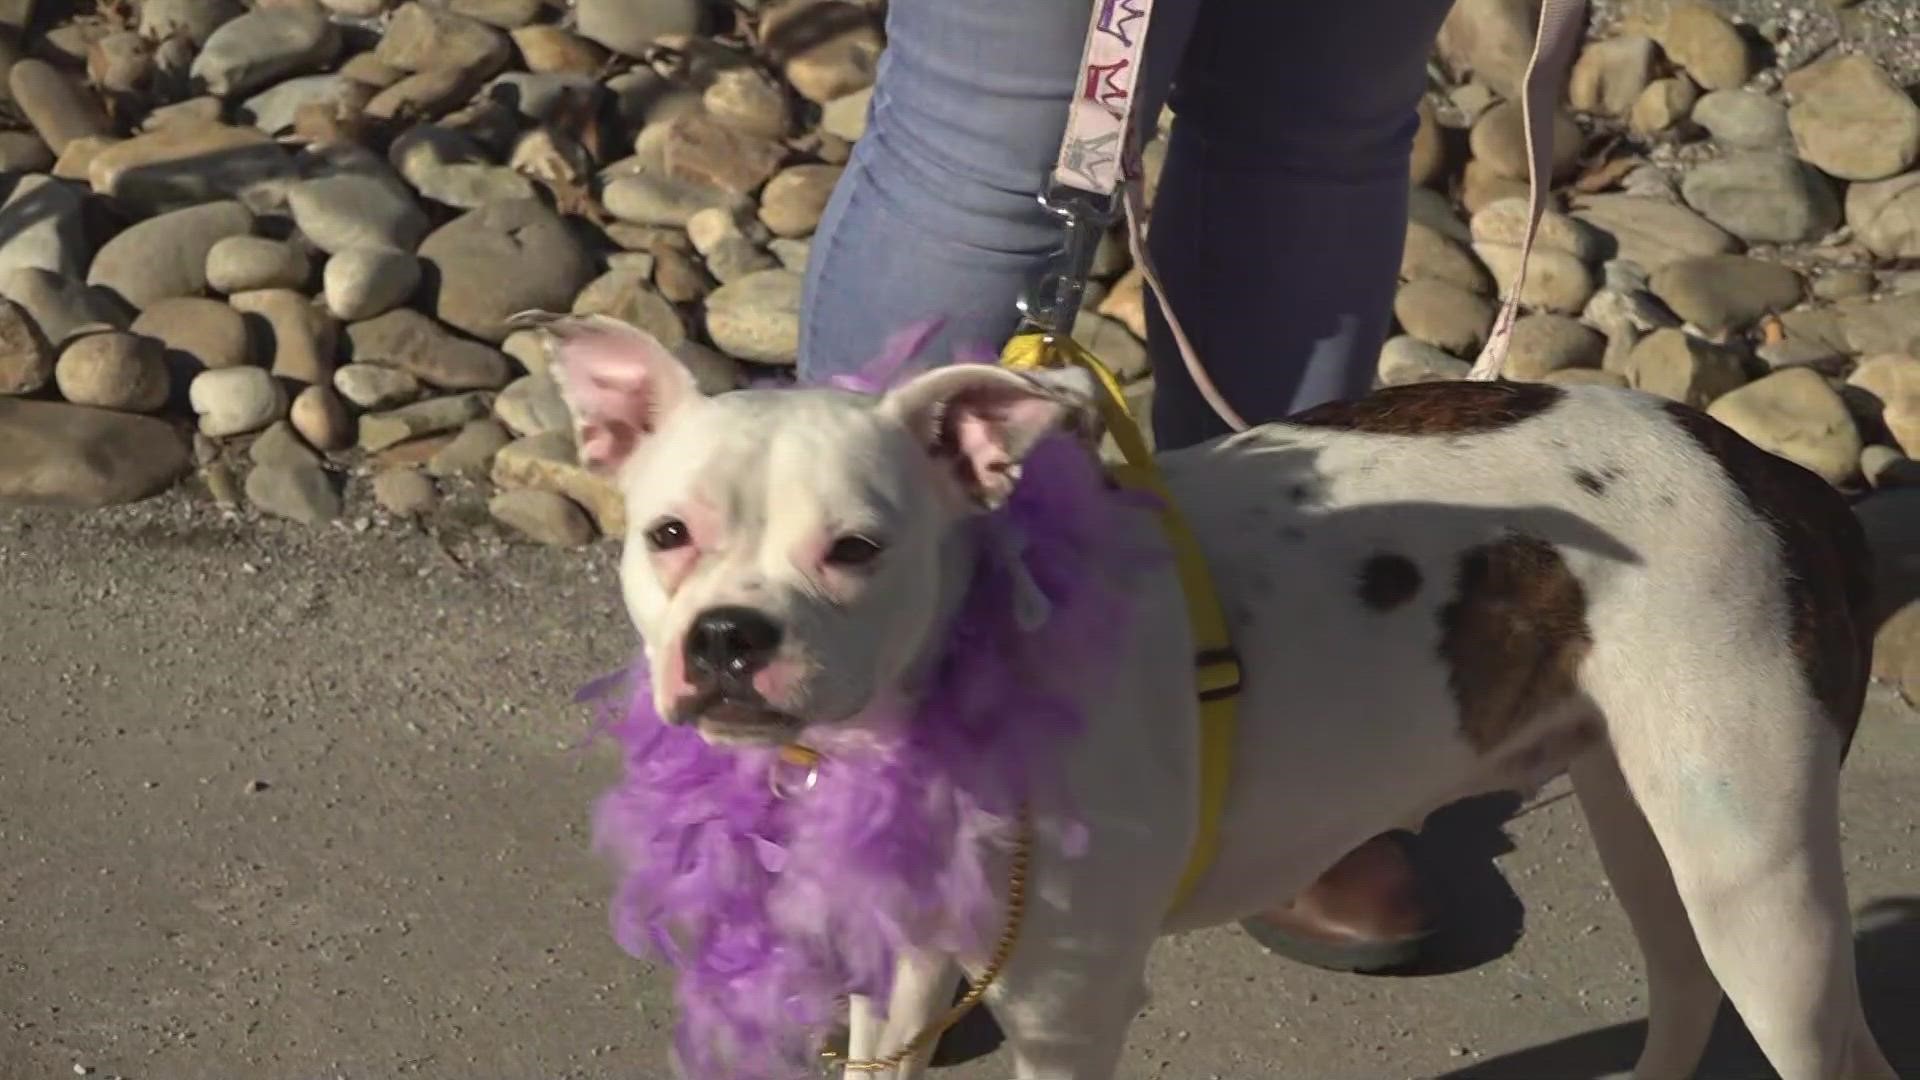 Young-Williams Animal Center speaks ahead of the 16th Mardi Growl event